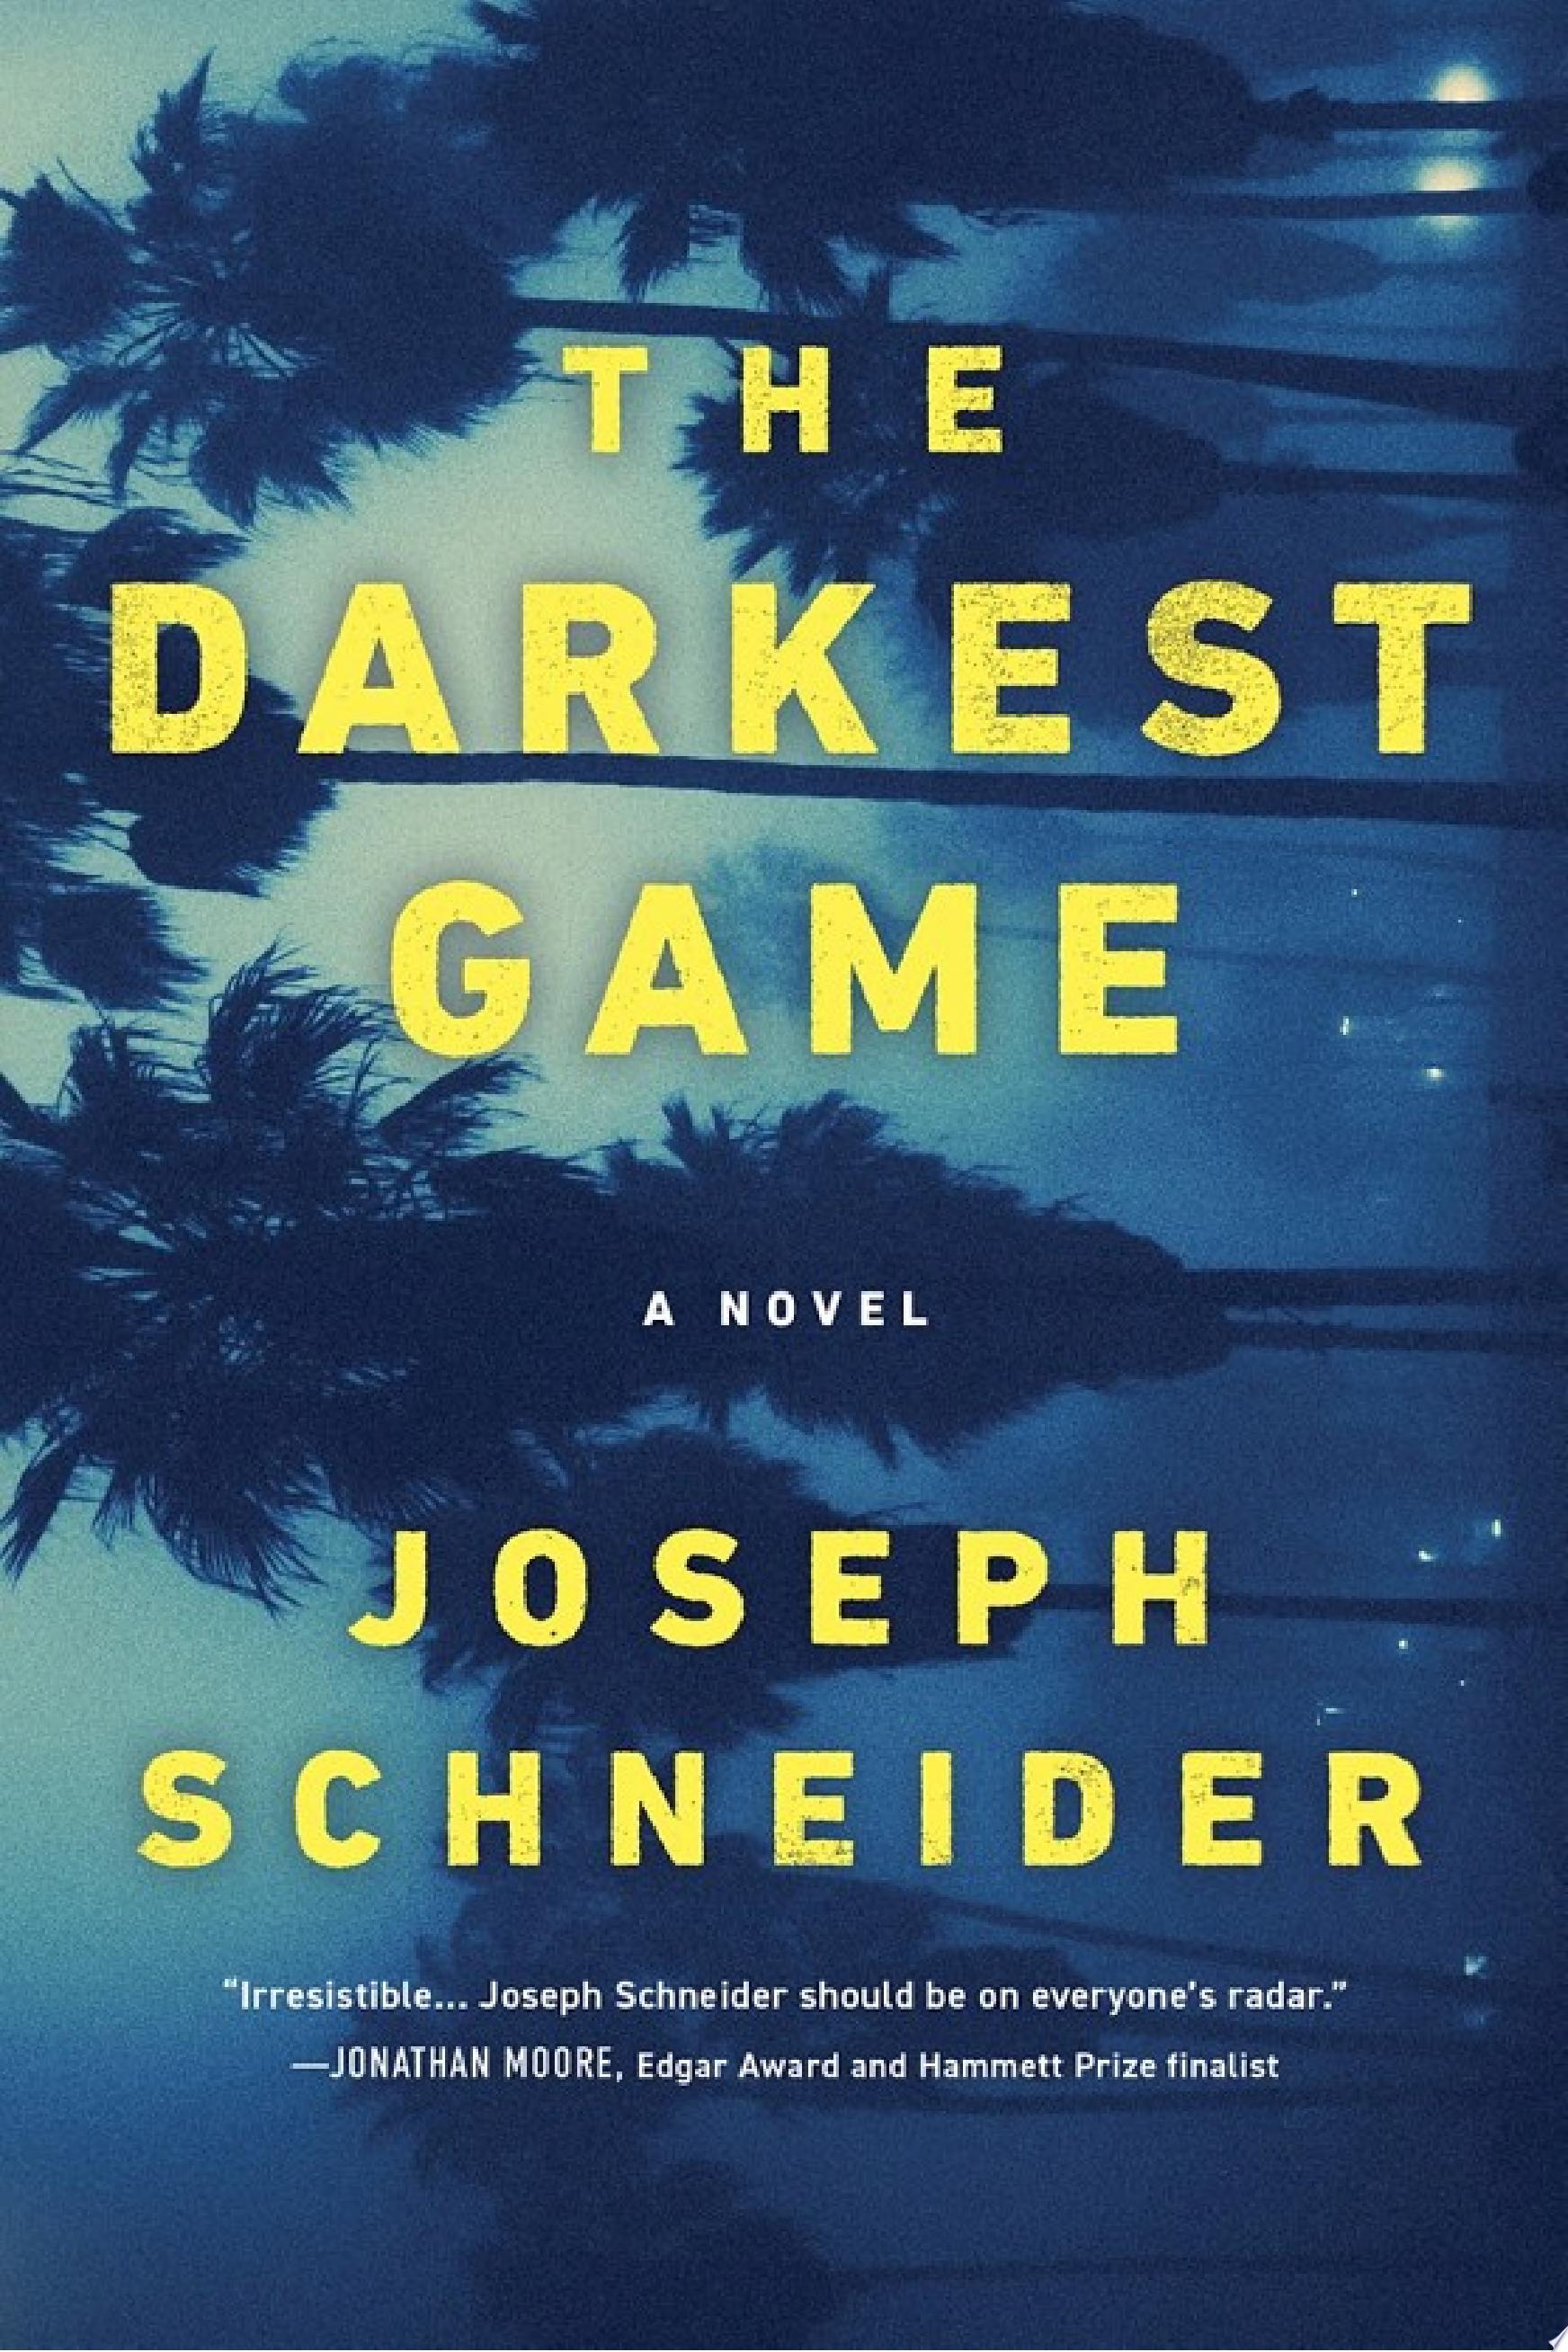 Image for "The Darkest Game"